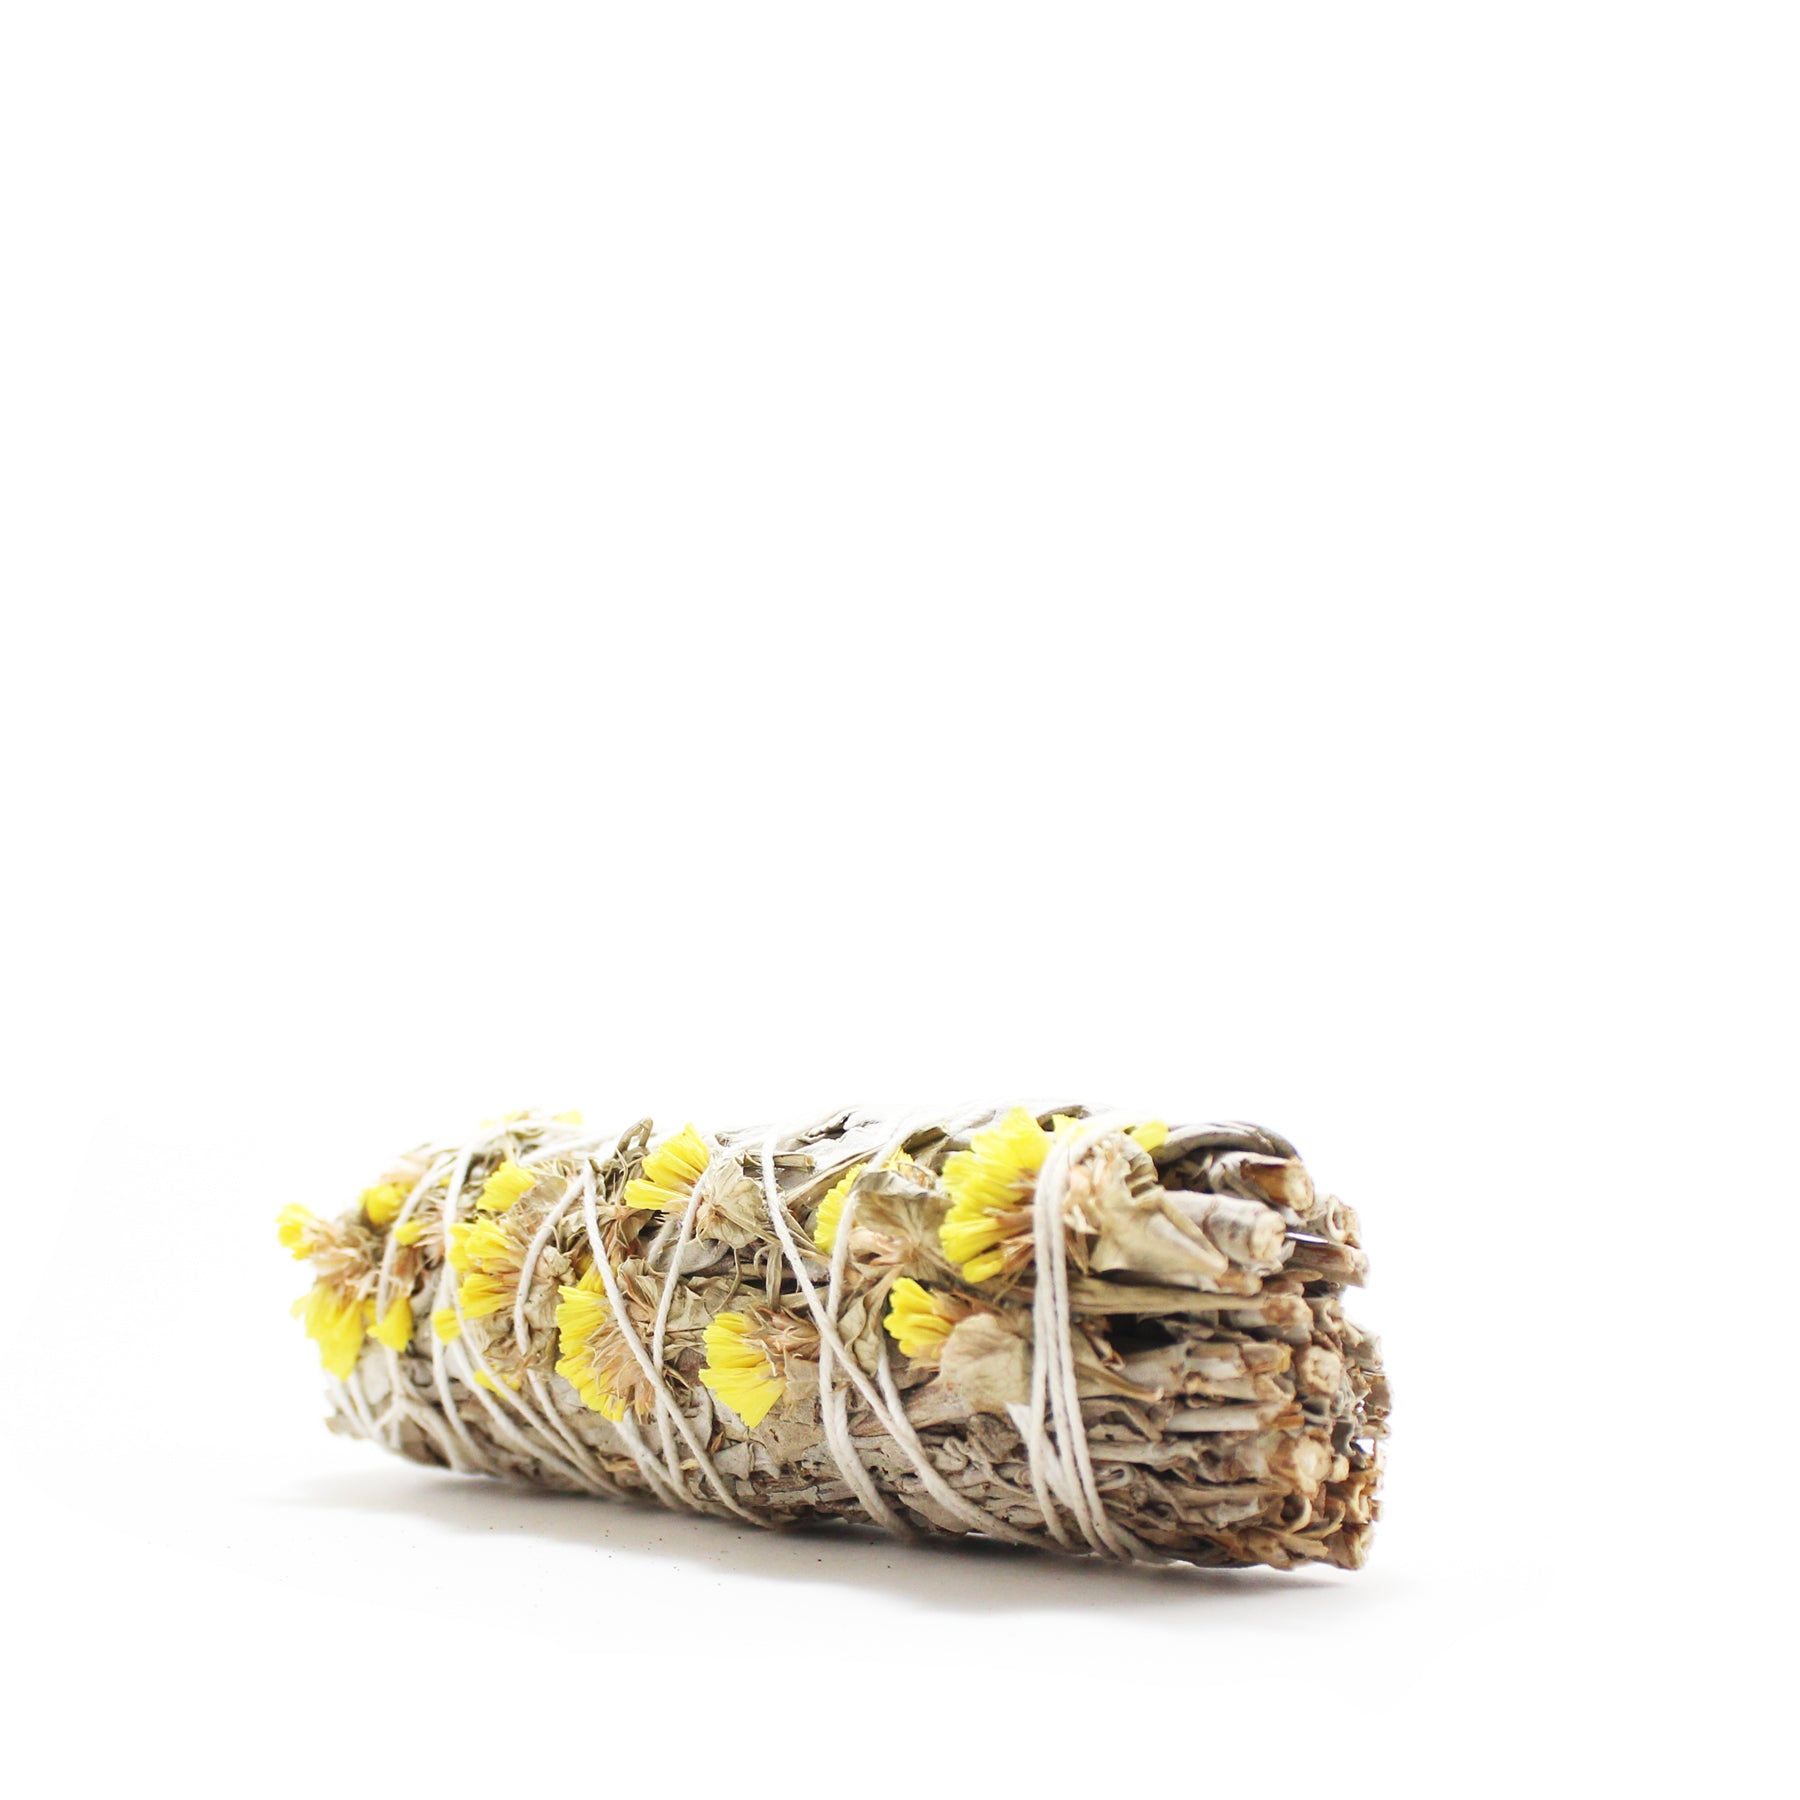 Natural California White Sage Torch and Yellow Sinuata Flowers